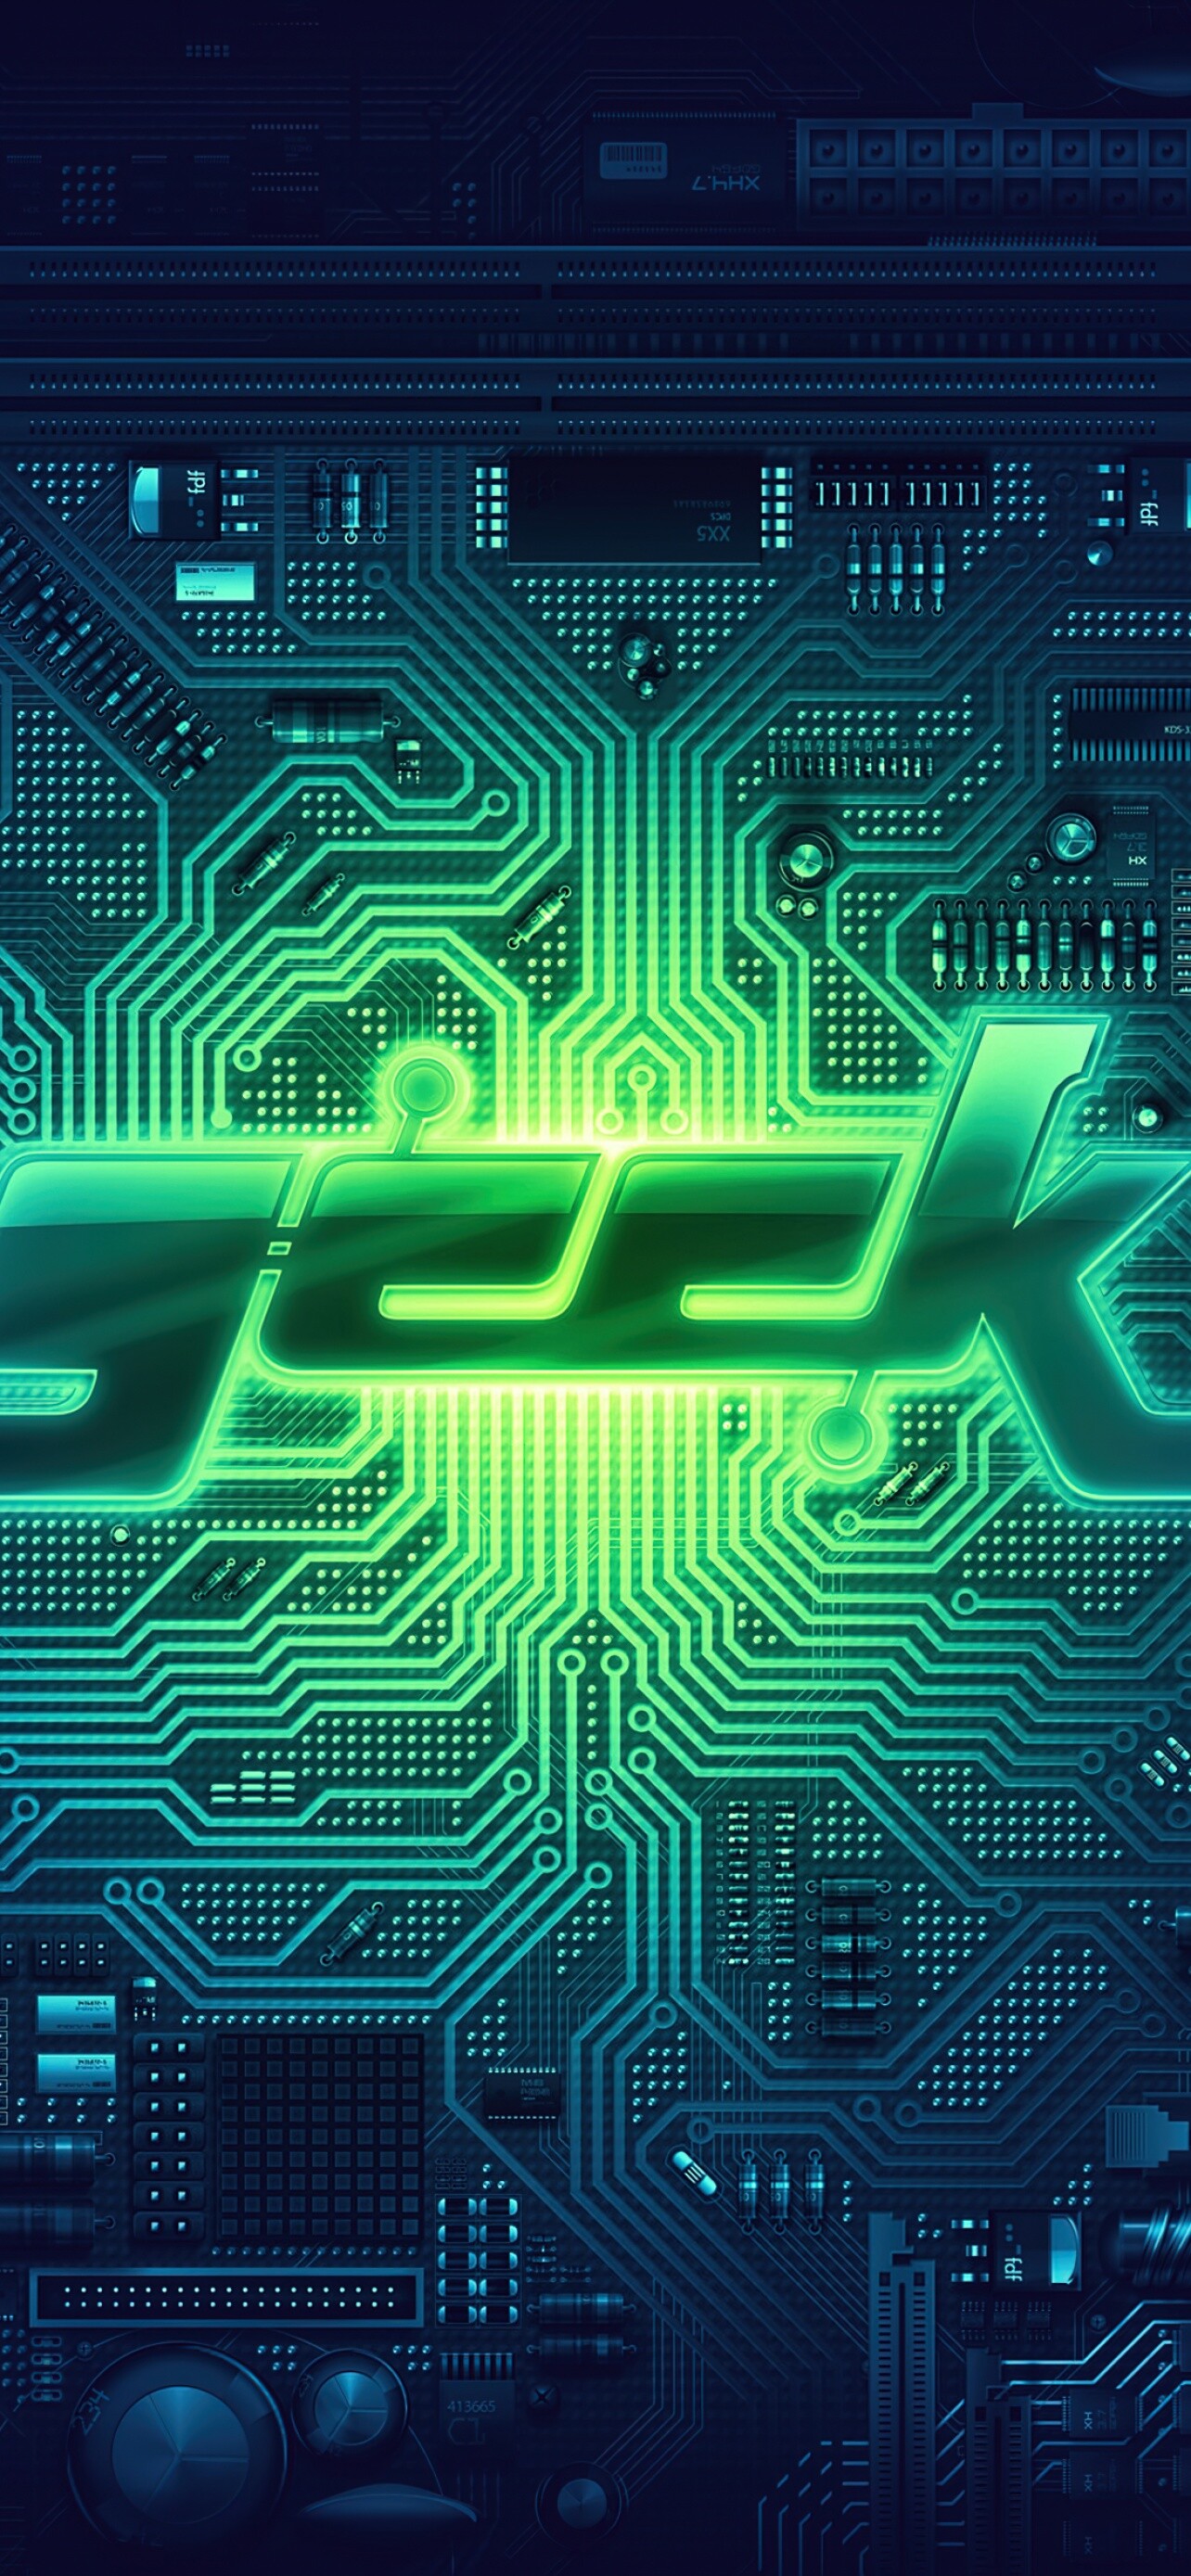 Geek: PCB, Circuit board, Technology, A person who is very interested in computers or science. 1290x2780 HD Wallpaper.